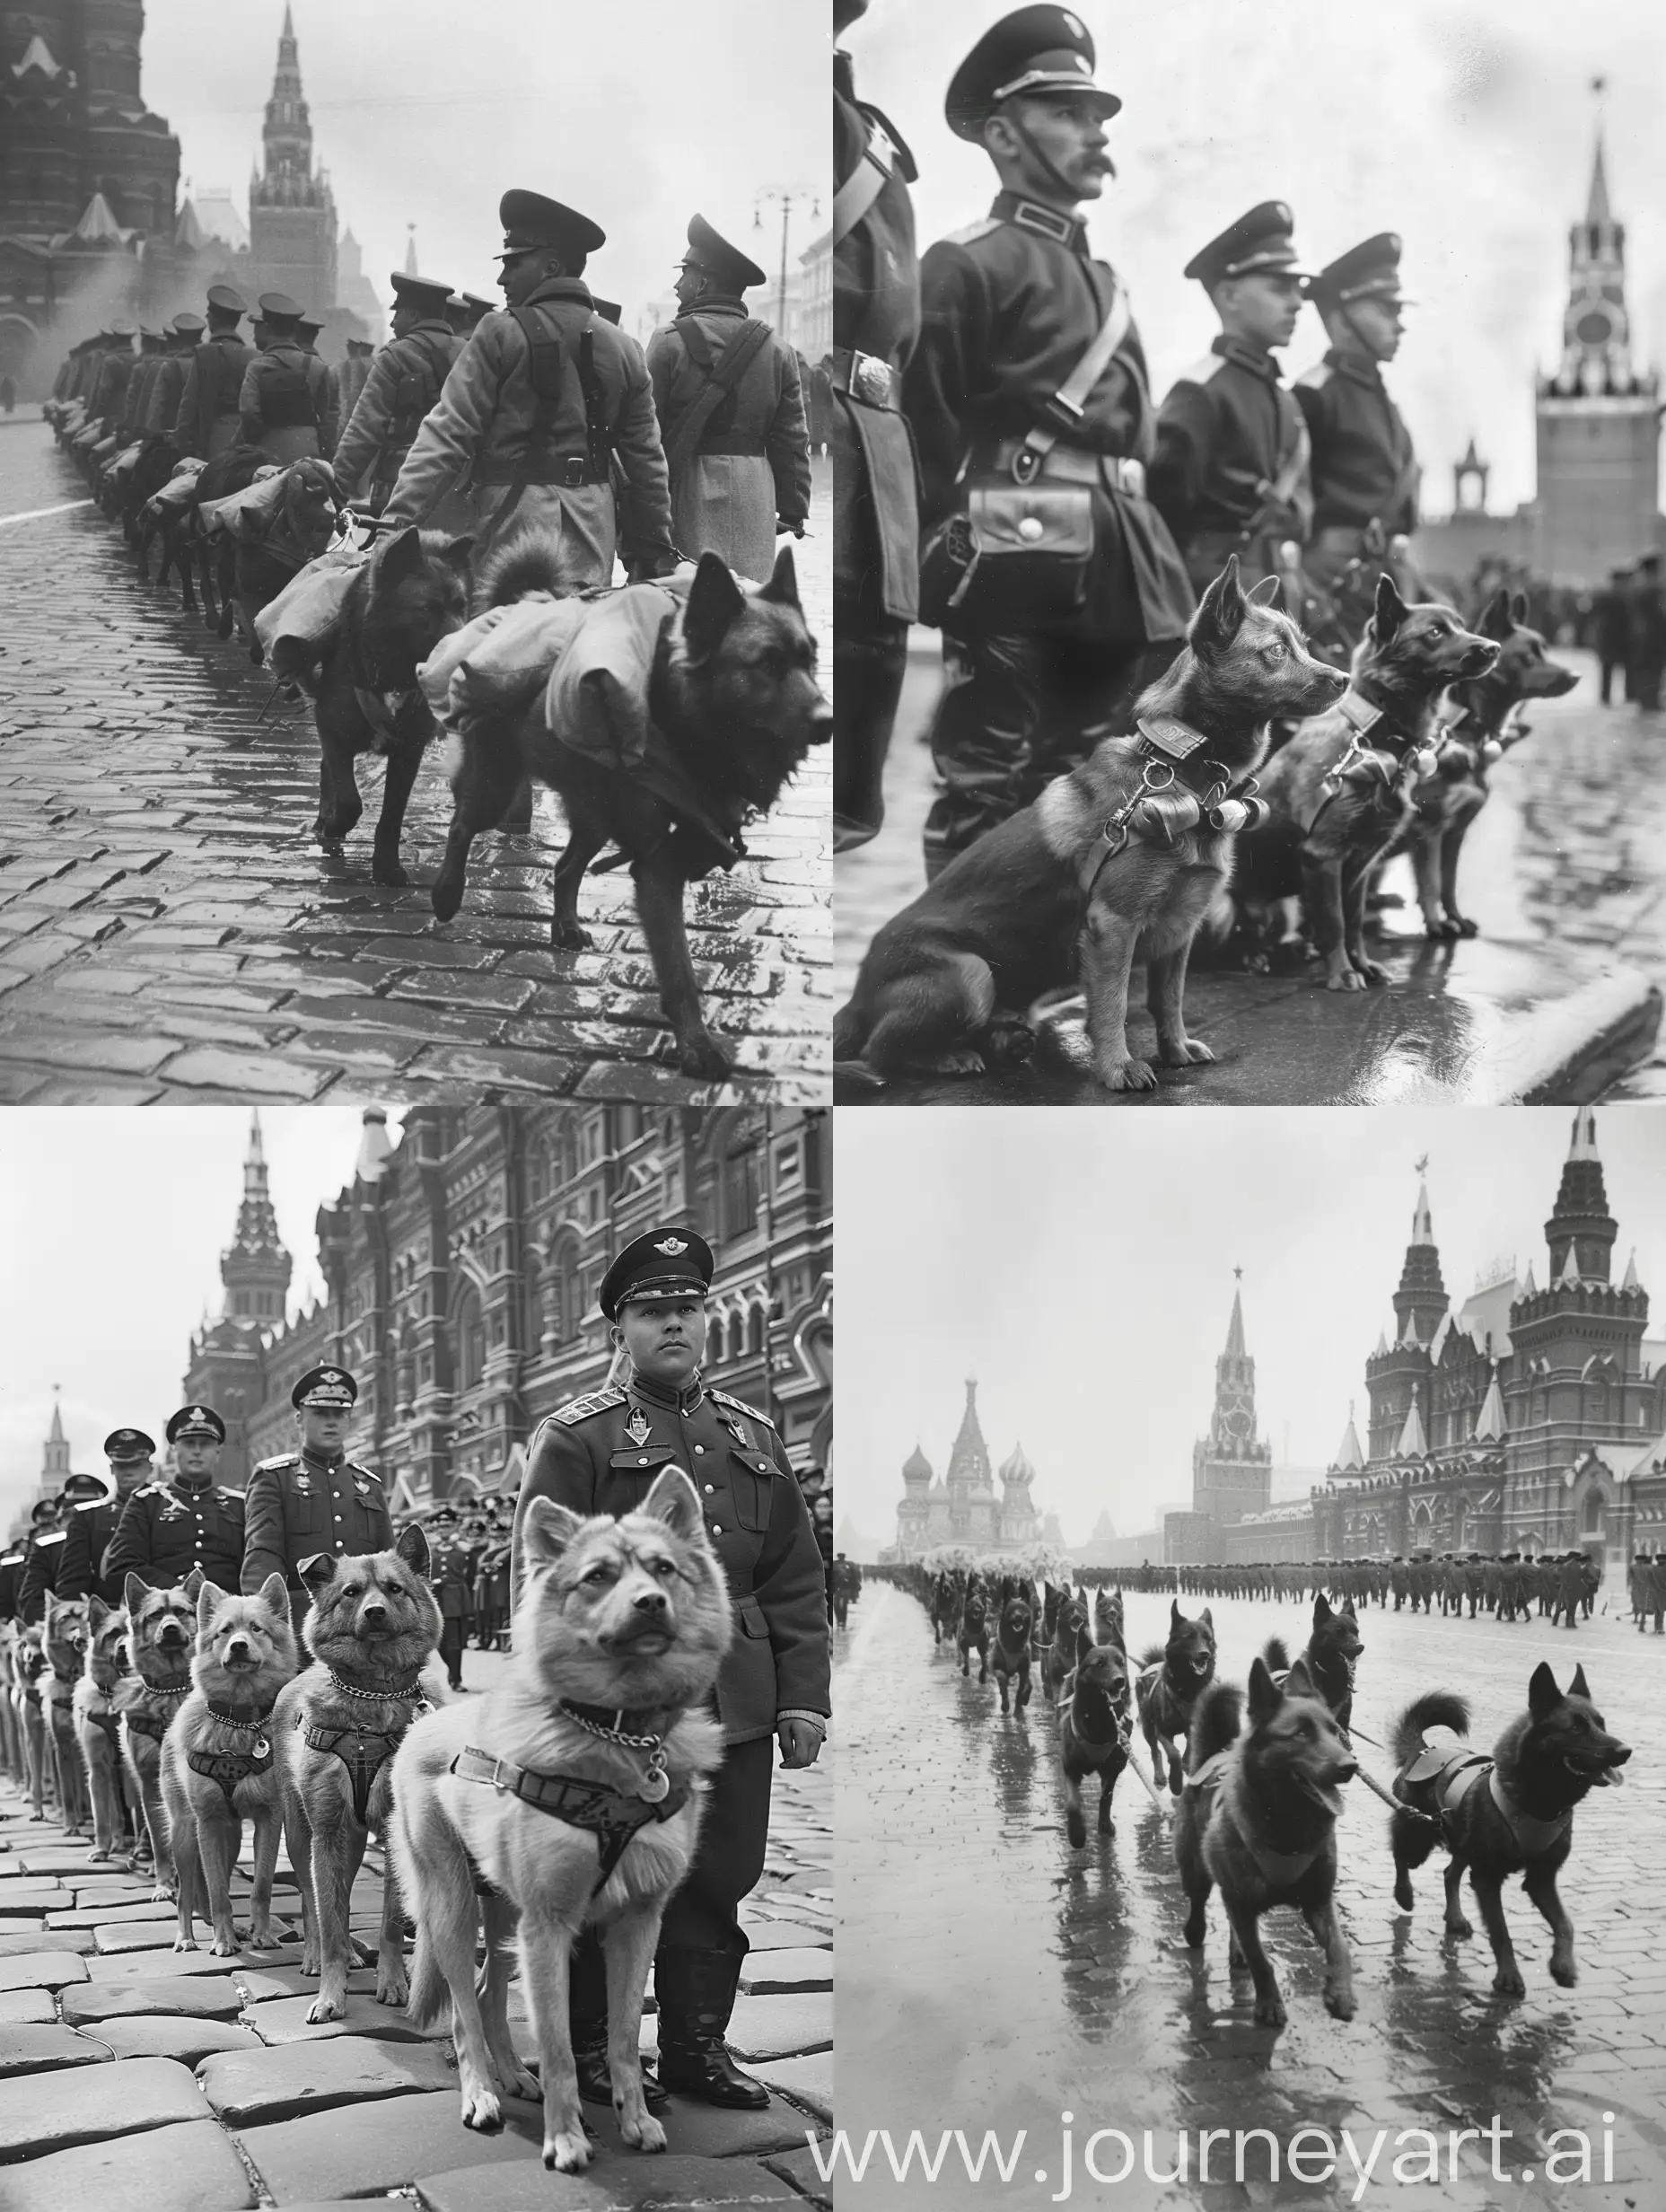 June-Victory-Parade-Regiment-with-Shepherd-Dogs-in-Black-and-White-Photo